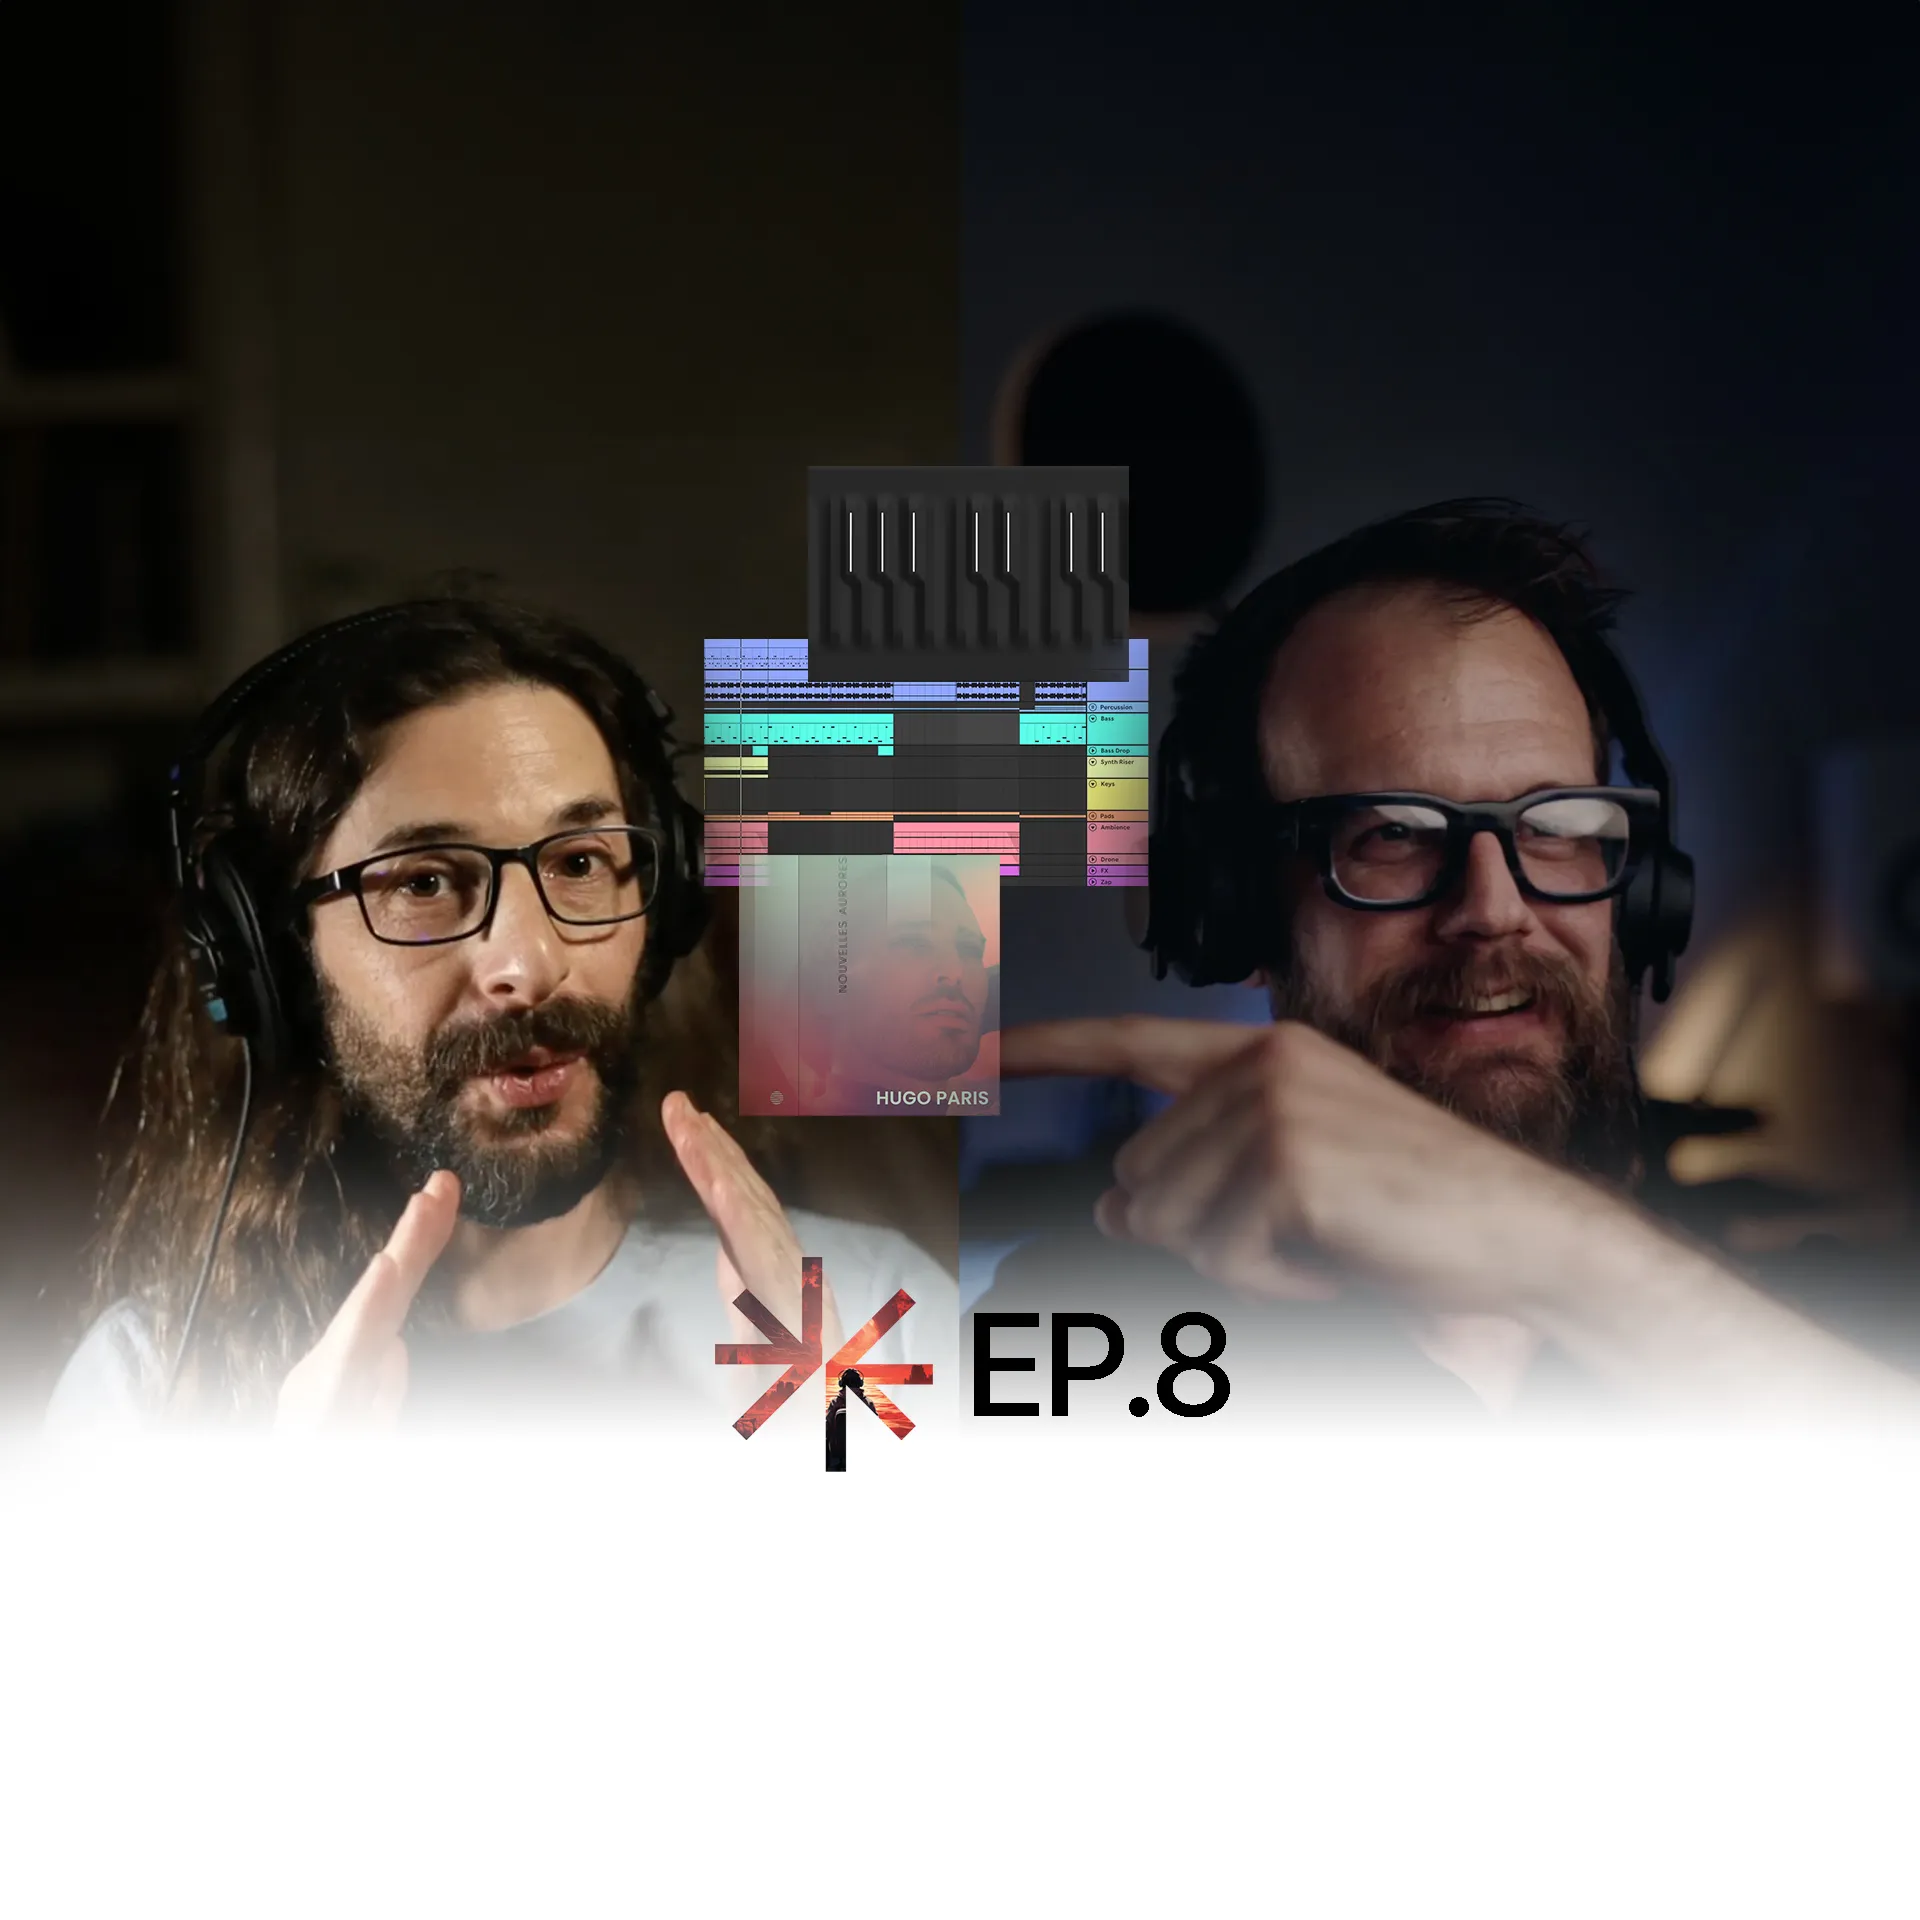 MPE and Eurorack, new Roli keyboards, Live 12, and an album from Hugo Paris on Patch Dispatch EP.8